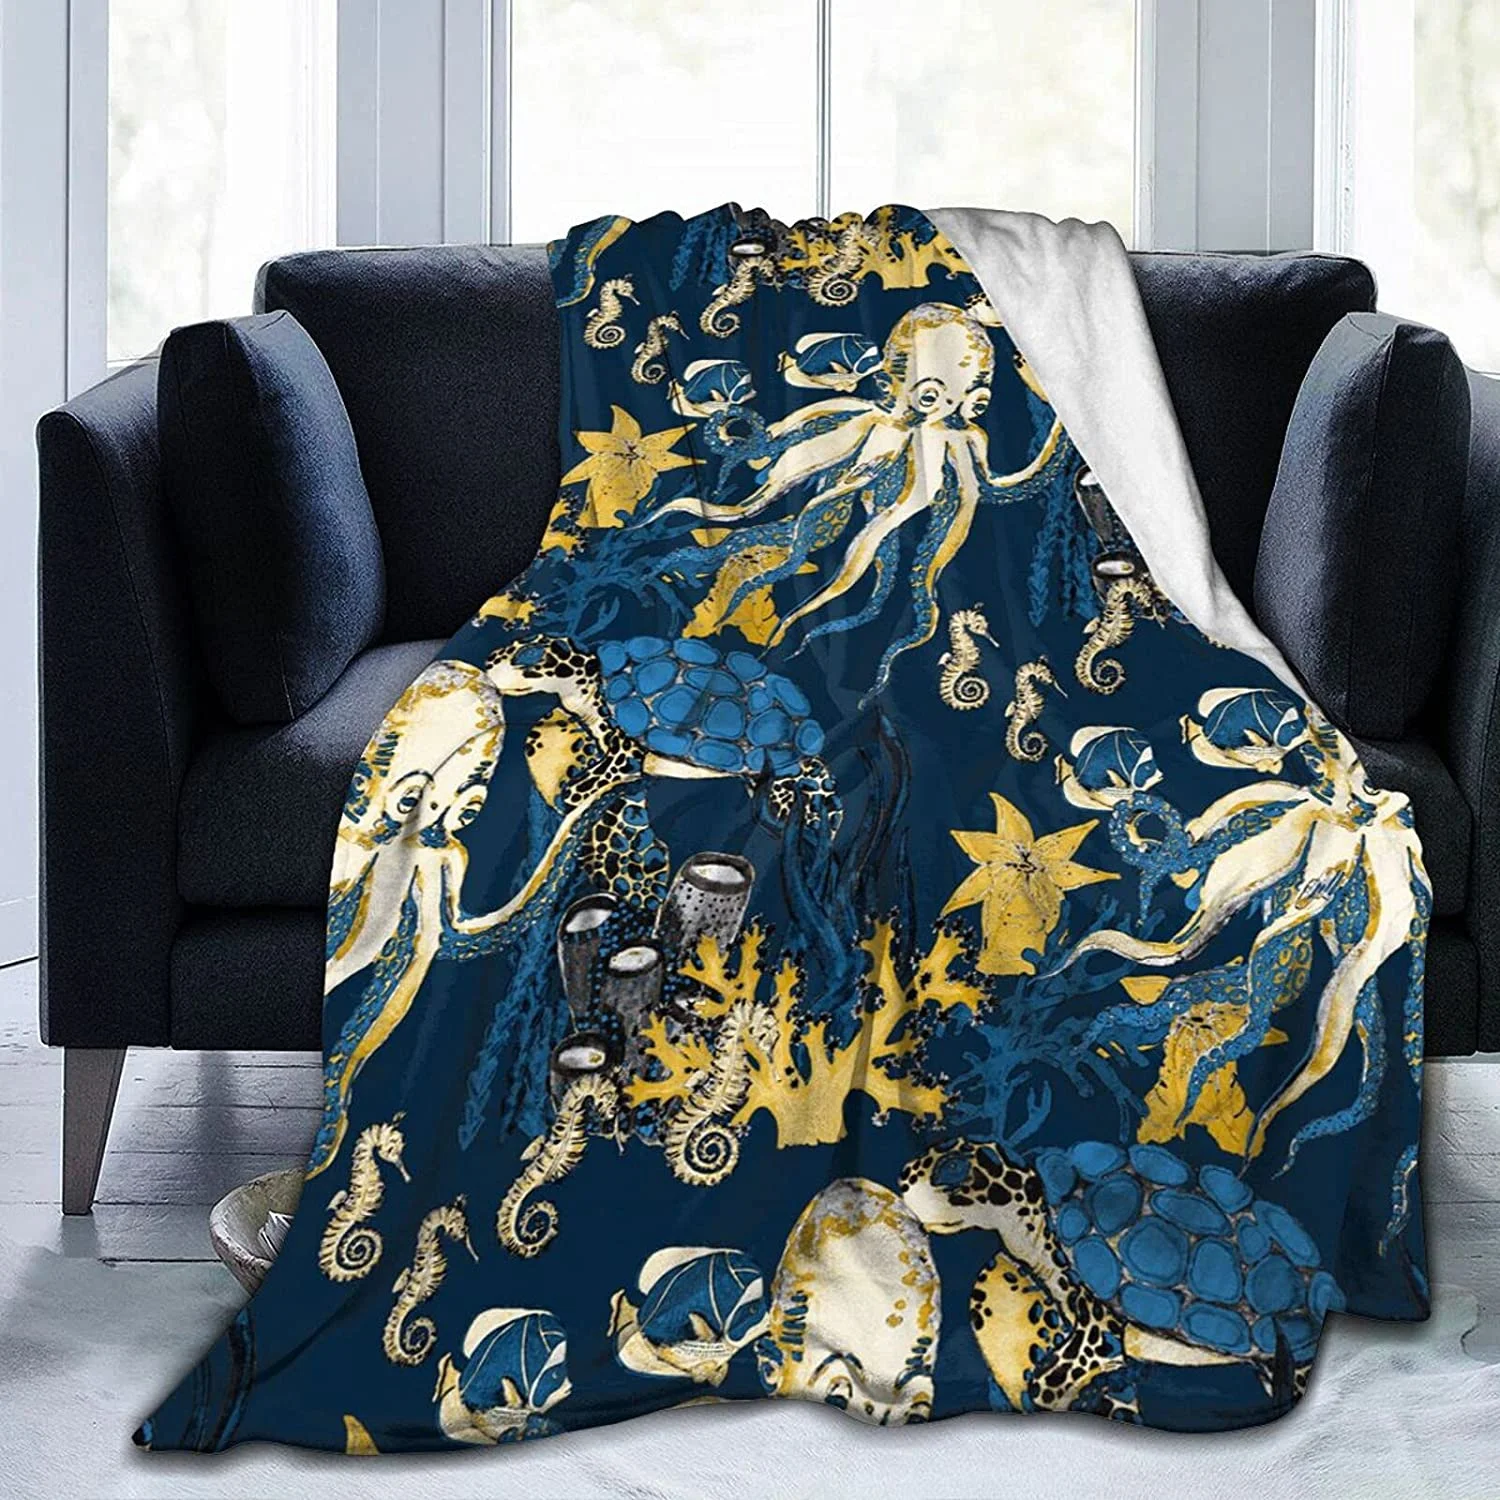 

Turtle Fish Seahorses Octopus Fleece Flannel Throw Blankets for Couch Bed Sofa Car,Cozy Soft Blanket Throw Queen King Size